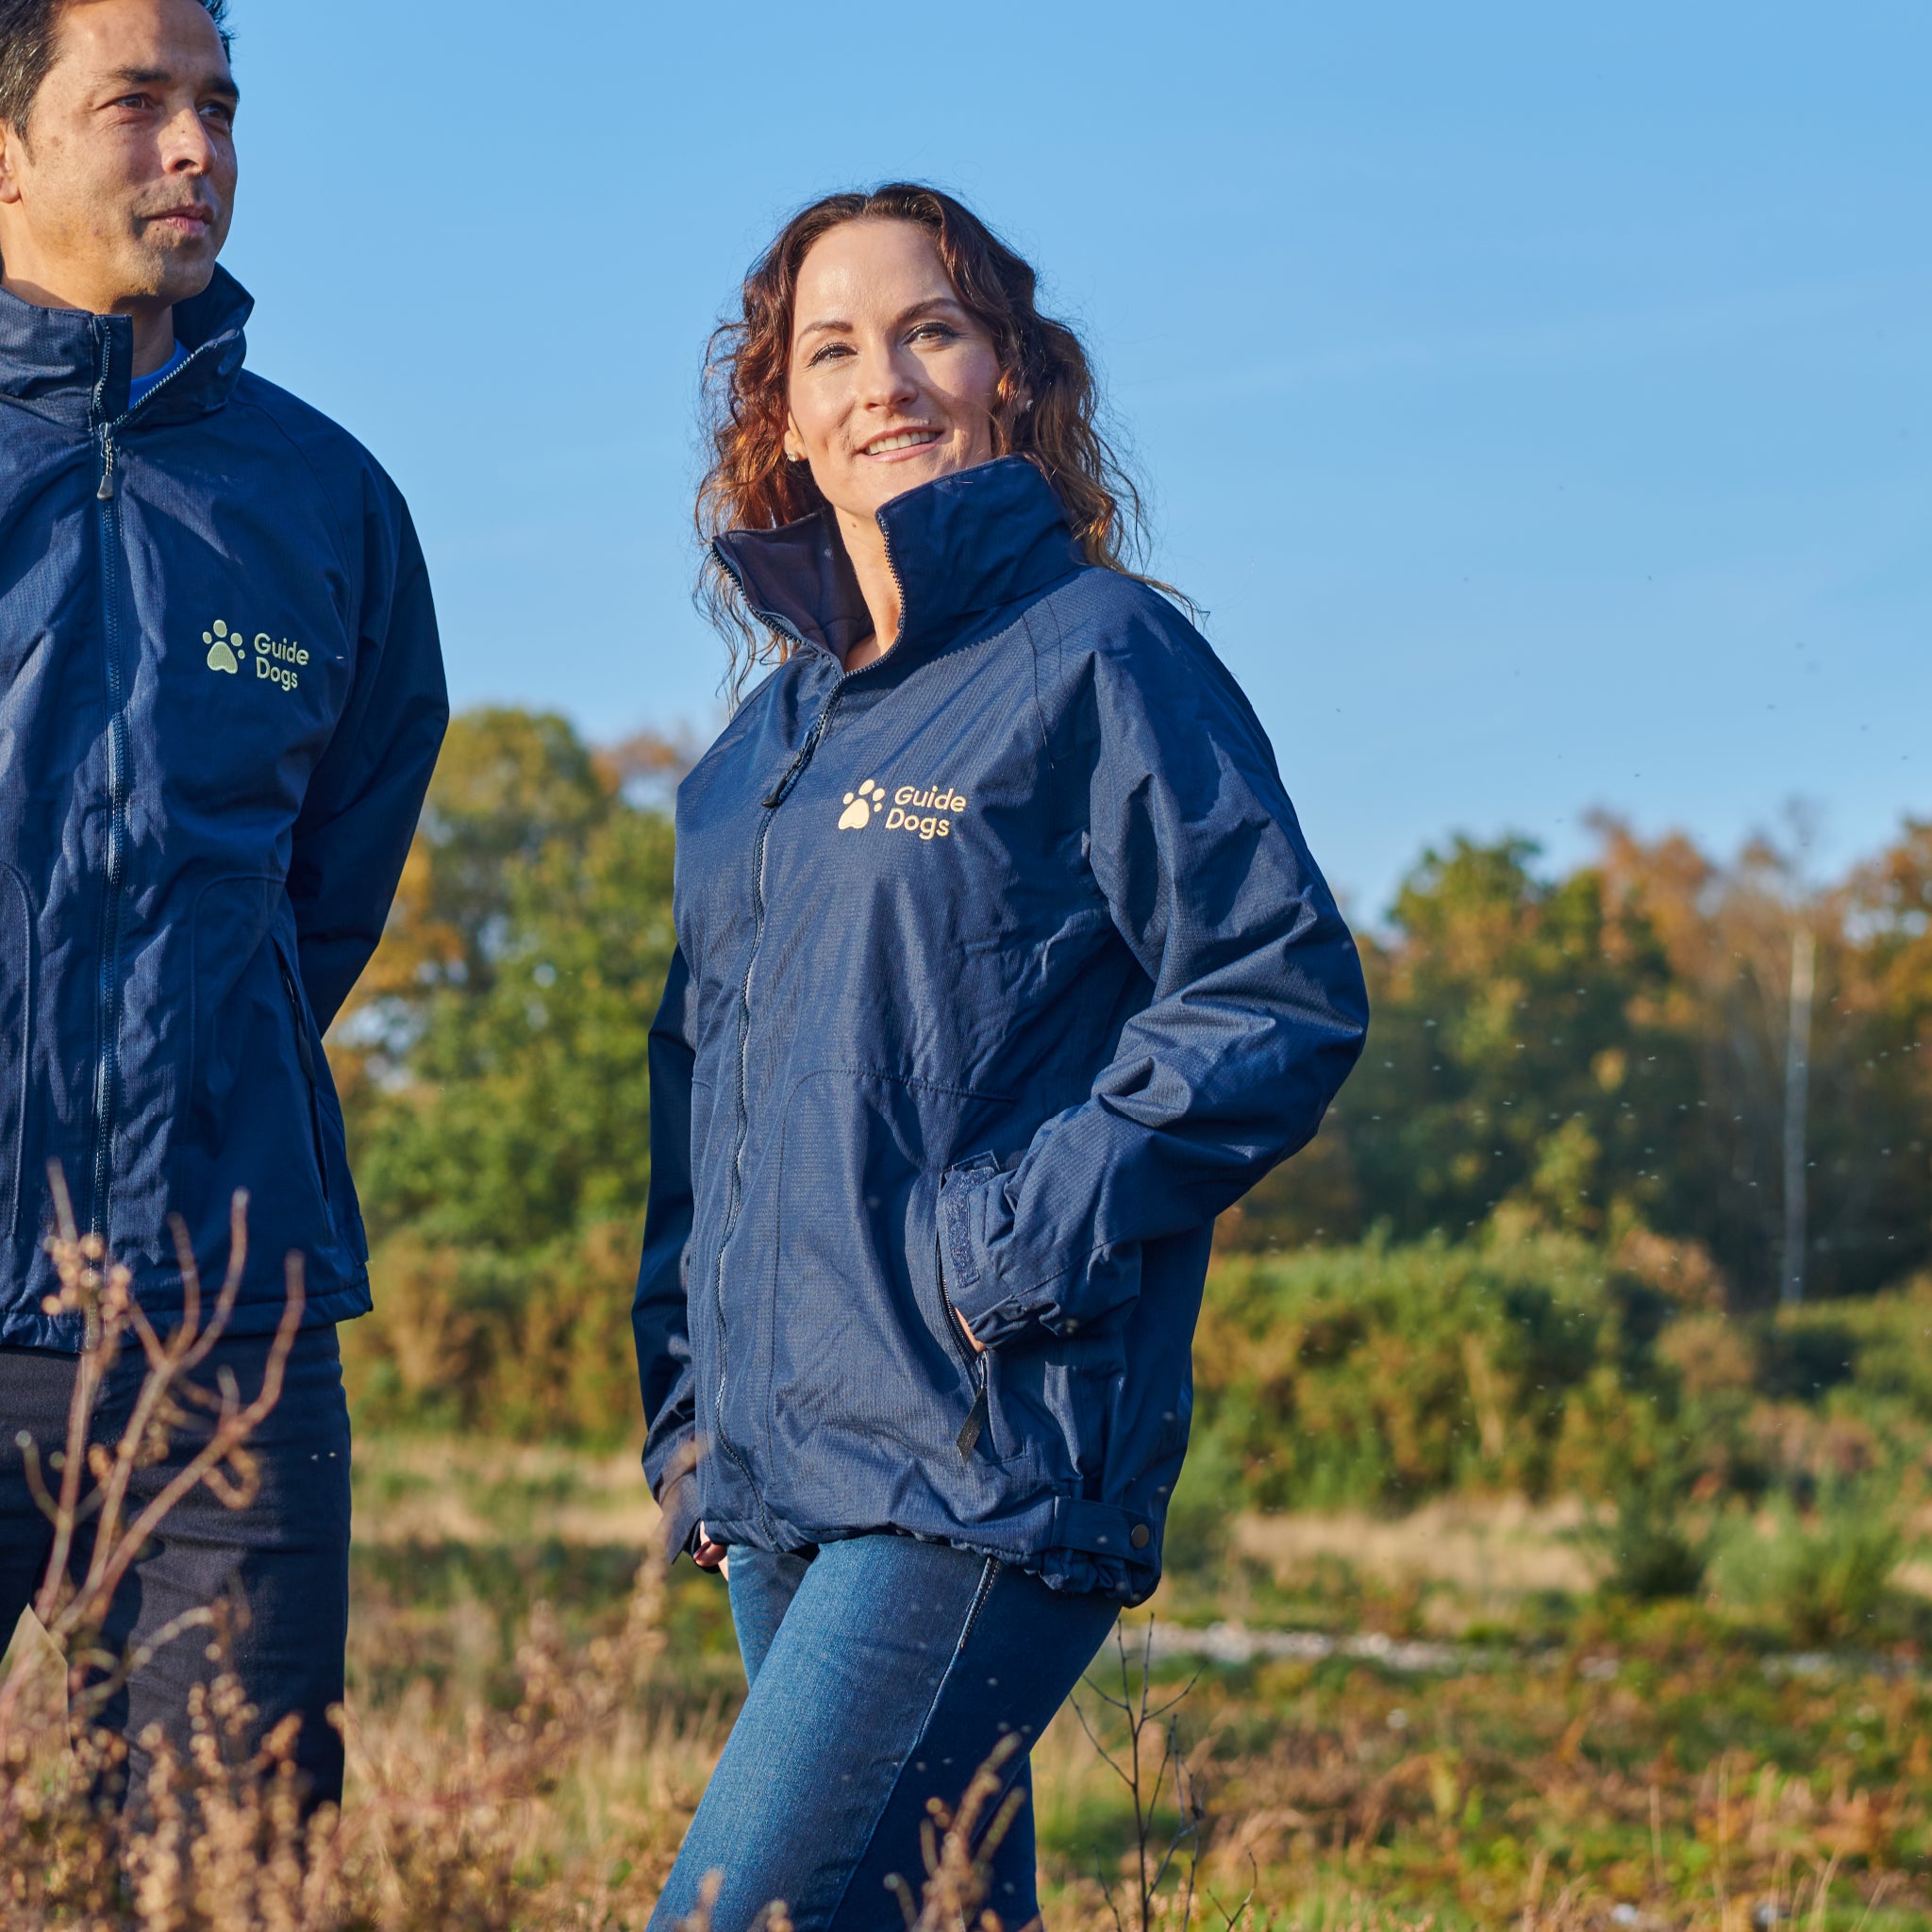 A lady with brown curly hair is wearing the blue Guide Dogs jacket and blue jeans in a field. A man next to her is also wearing the jacket.